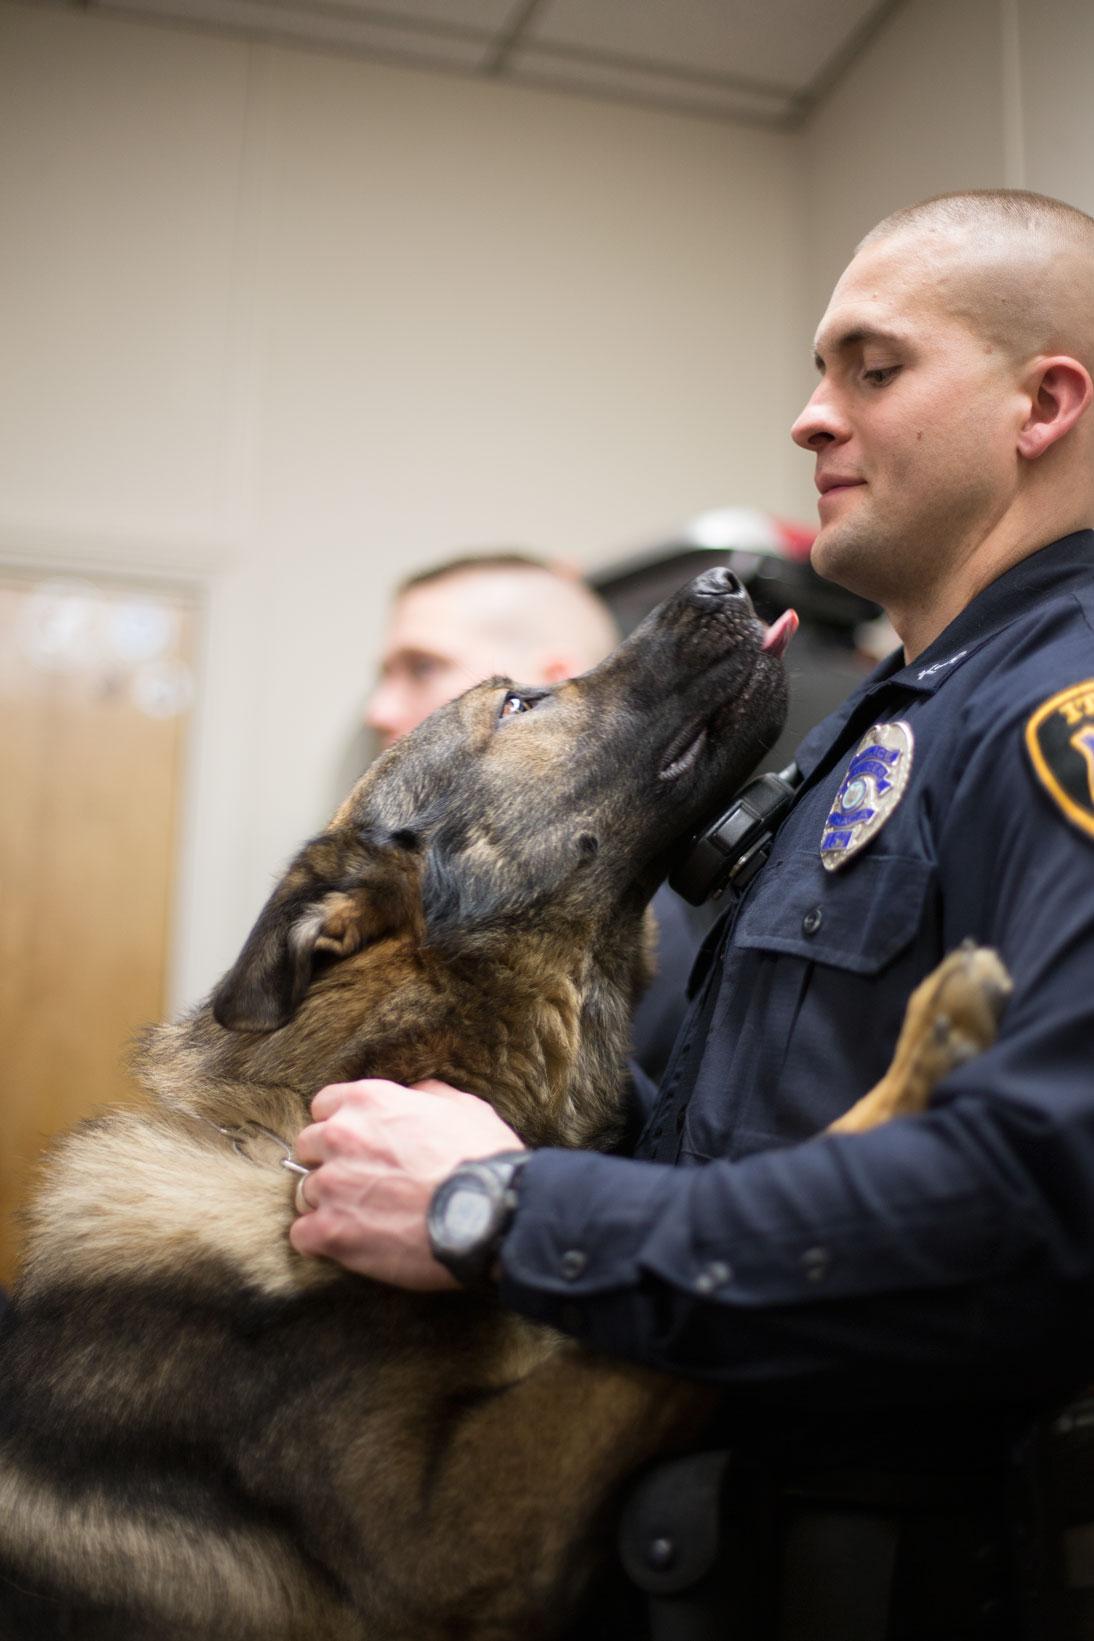 Take a look at Ithaca Police Department’s only K-9 unit